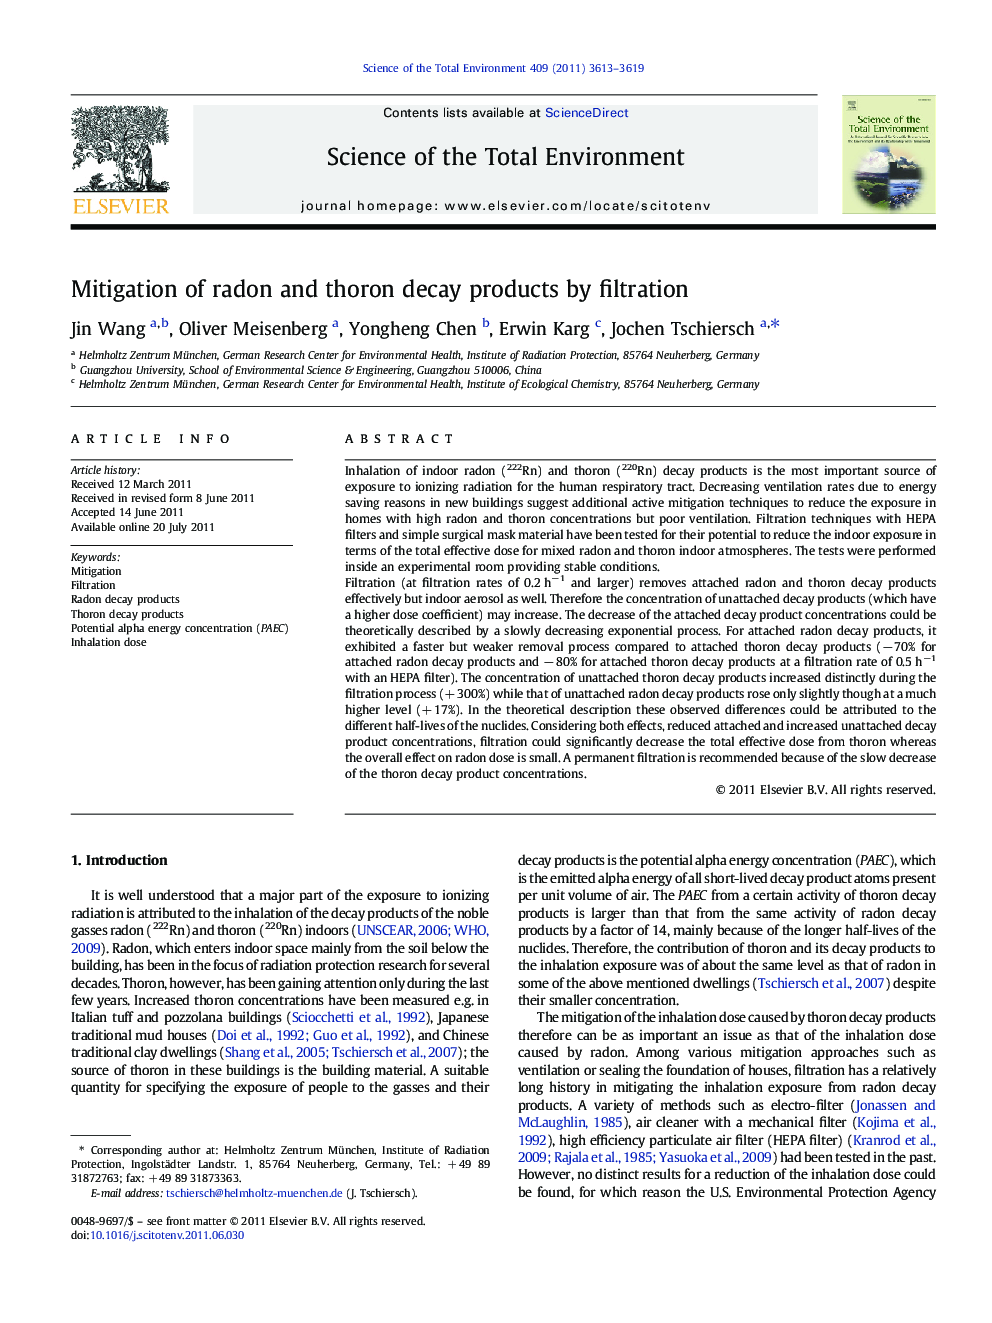 Mitigation of radon and thoron decay products by filtration